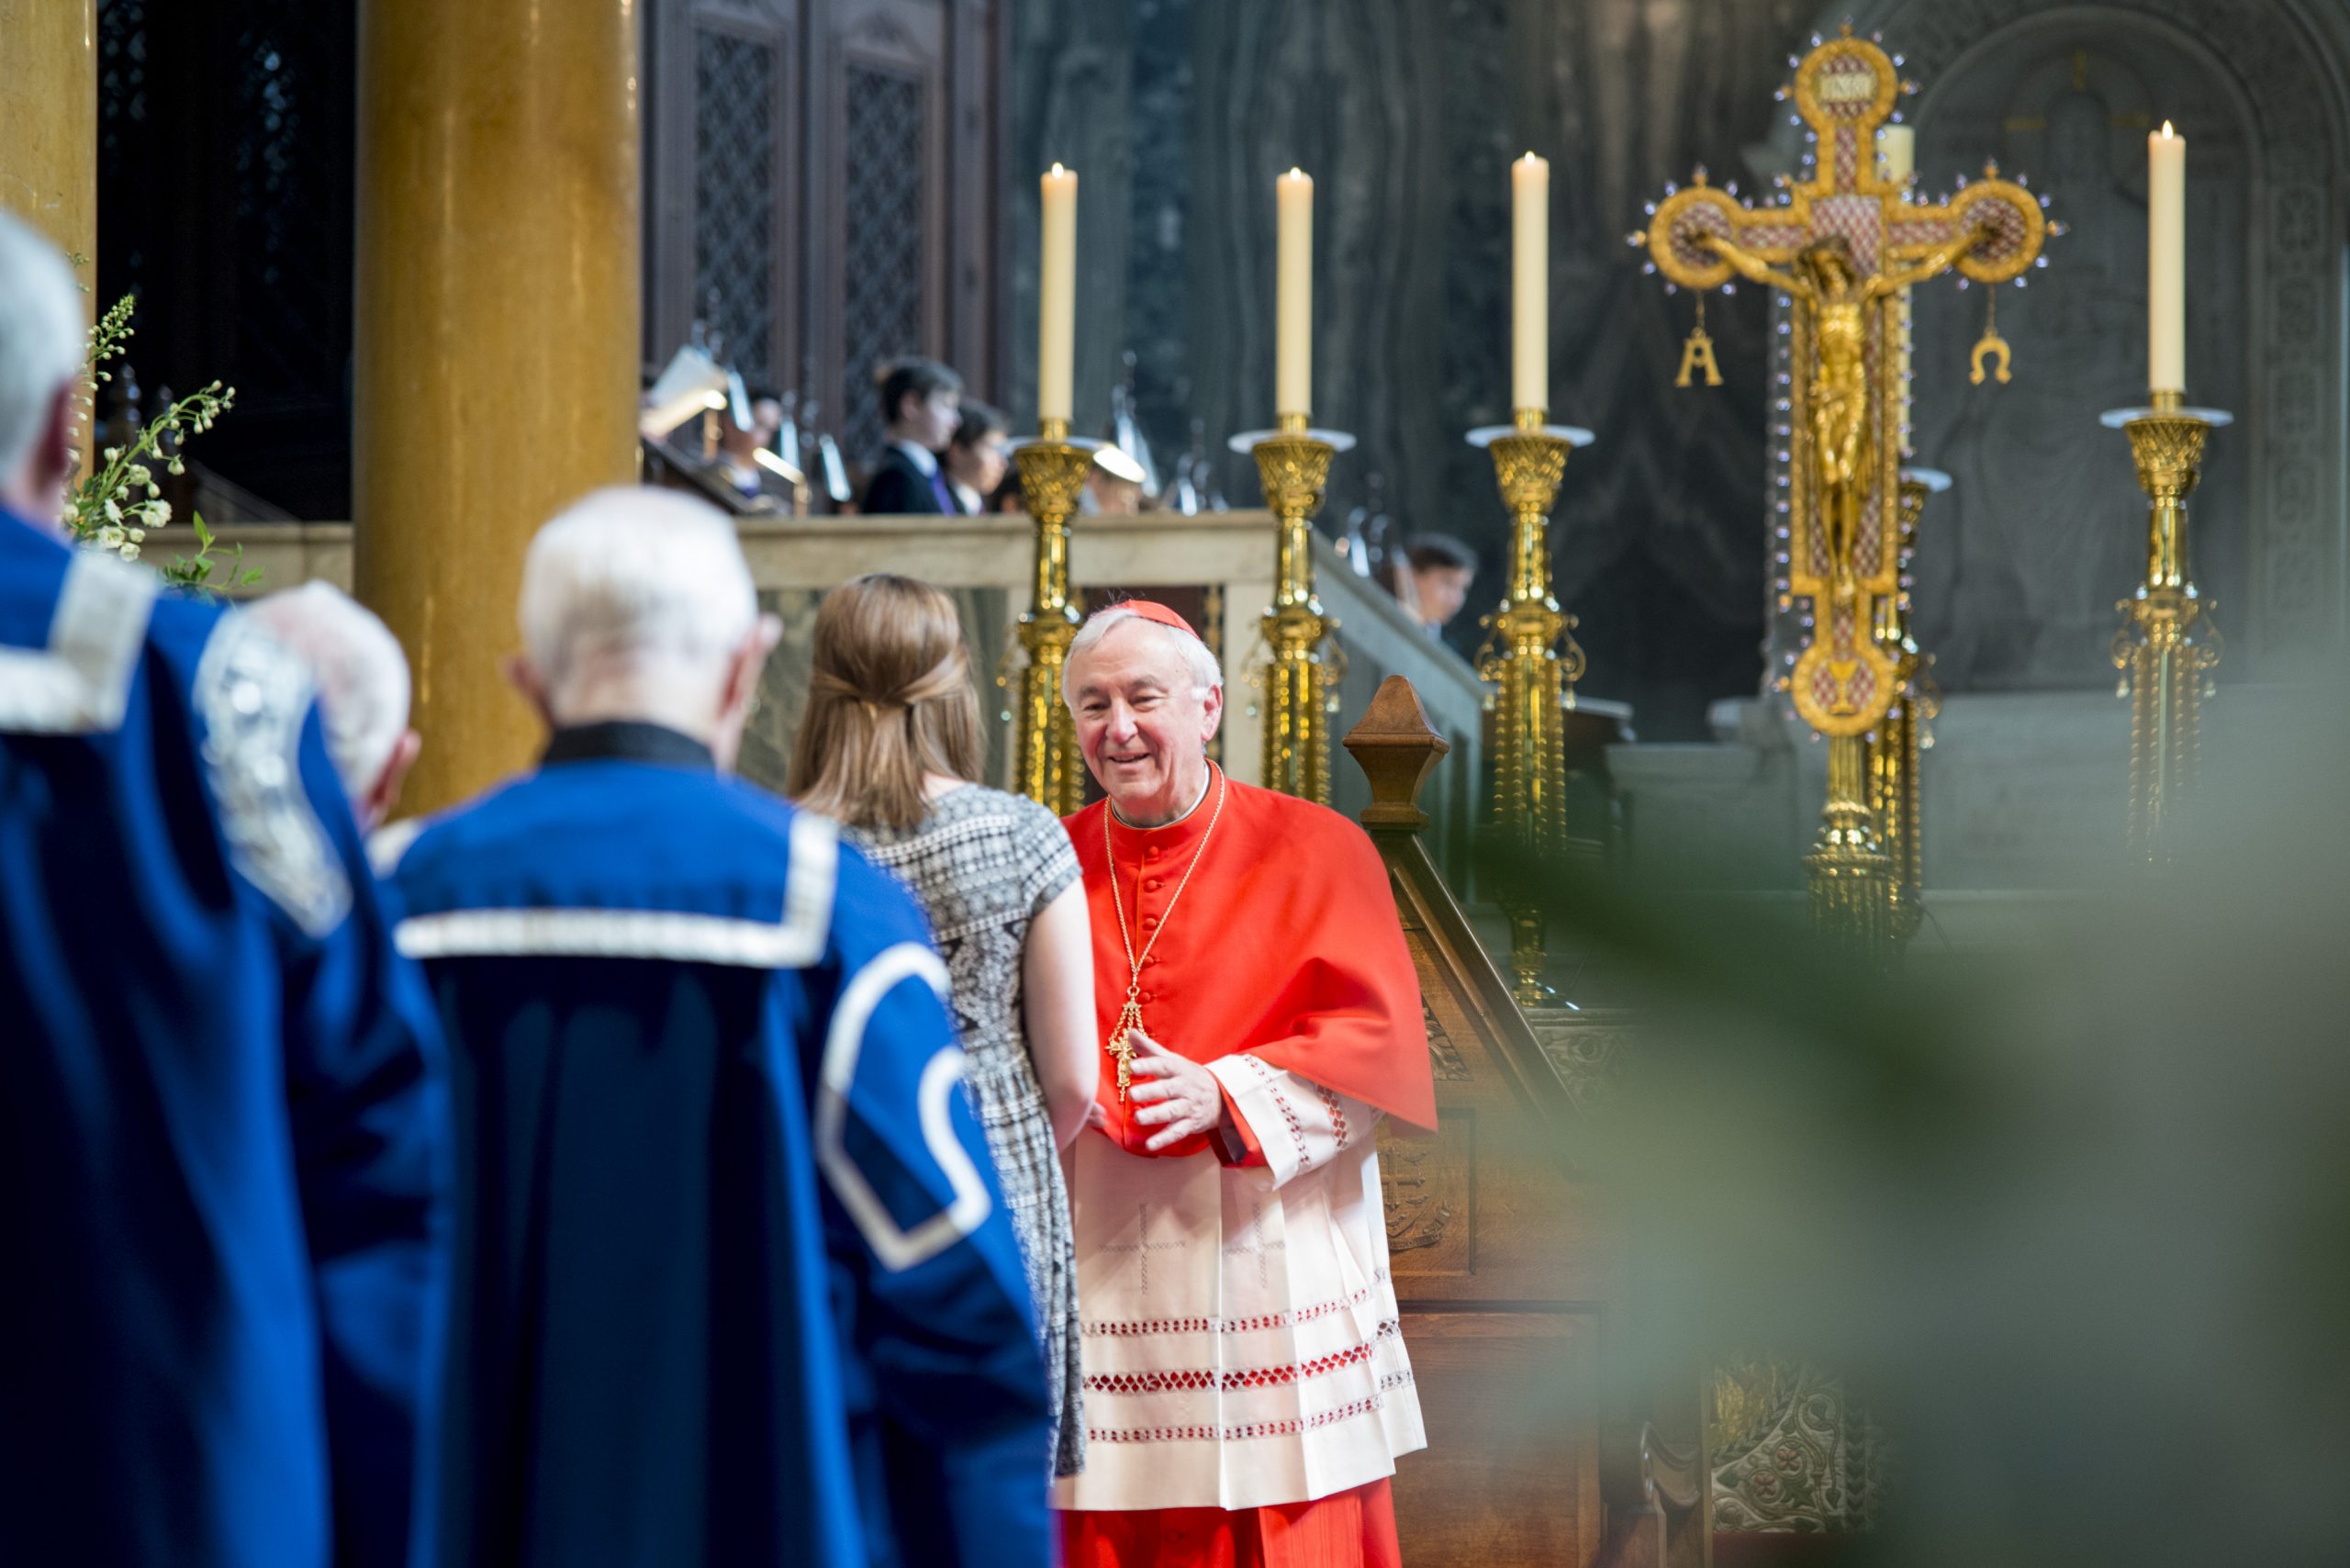 Cardinal Vincent Nichols’ homily during his Installation as first Chancellor of St Mary’s University, UK